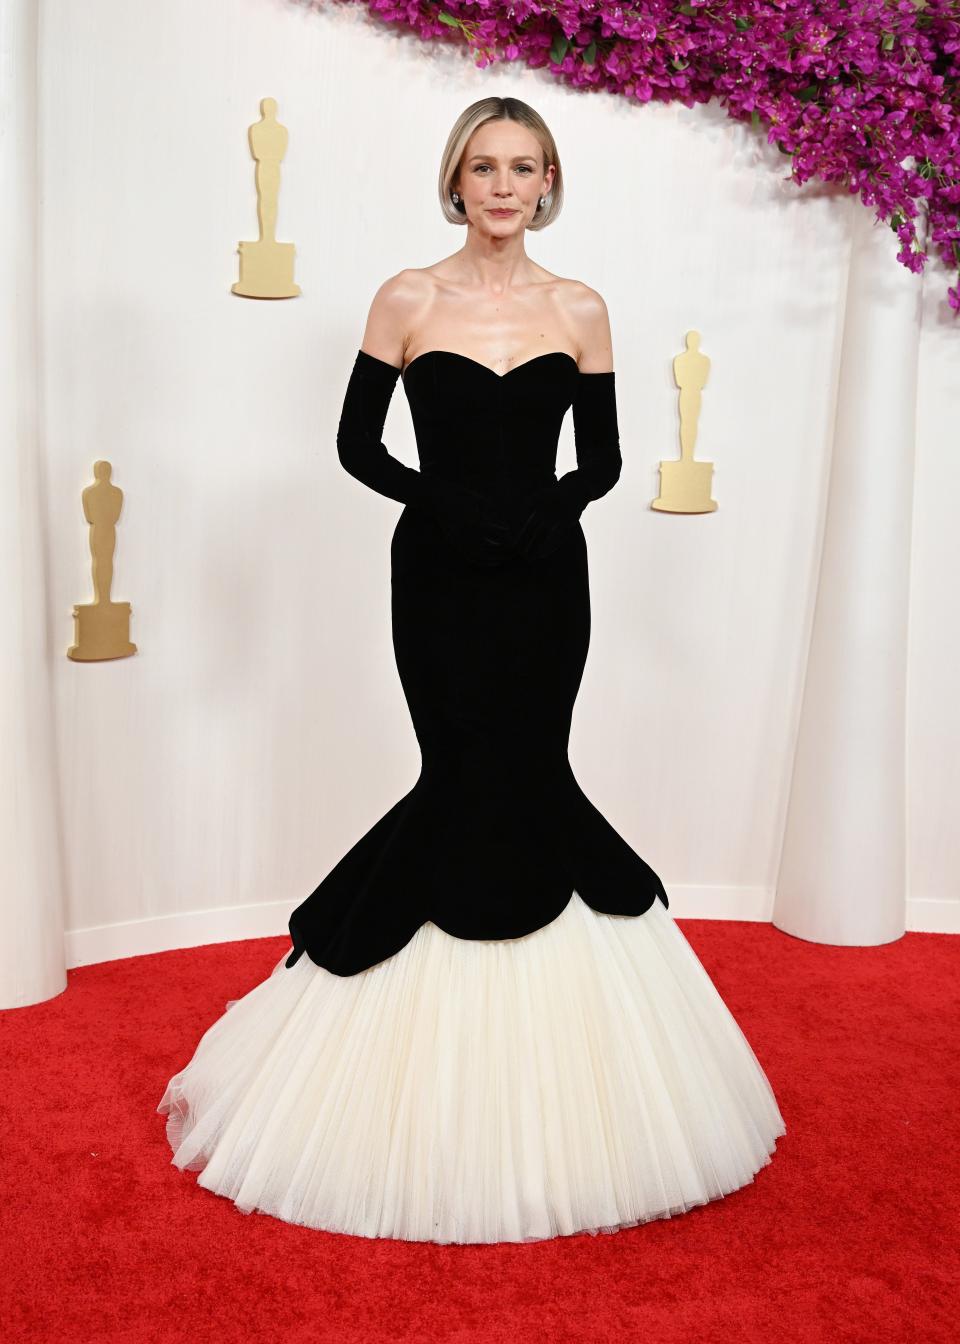 Image may contain: Carey Mulligan, Fashion, Clothing, Dress, Adult, Person, Wedding, Premiere, Red Carpet, and Formal Wear